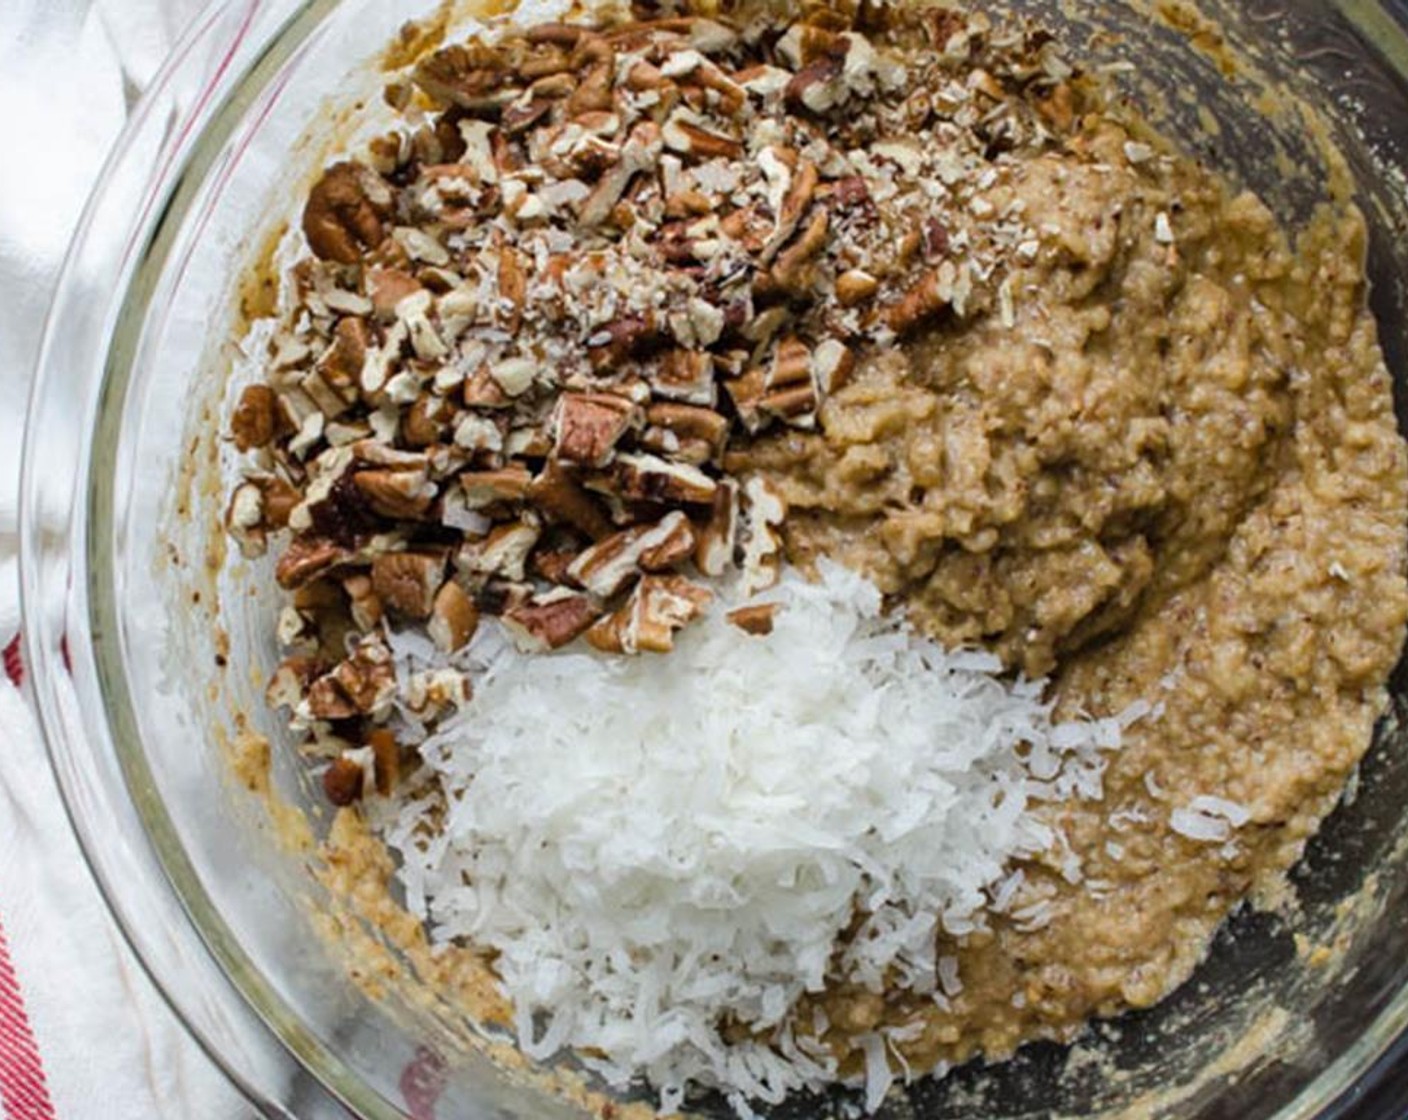 step 6 Add the pecans and Sweetened Coconut Flakes (1/2 cup) to the banana mixture and stir. Transfer the batter to the prepared loaf pan and sprinkle with the remaining 2 tablespoons of Chopped Pecans (2 Tbsp) and Pepitas (2 Tbsp) if desired.